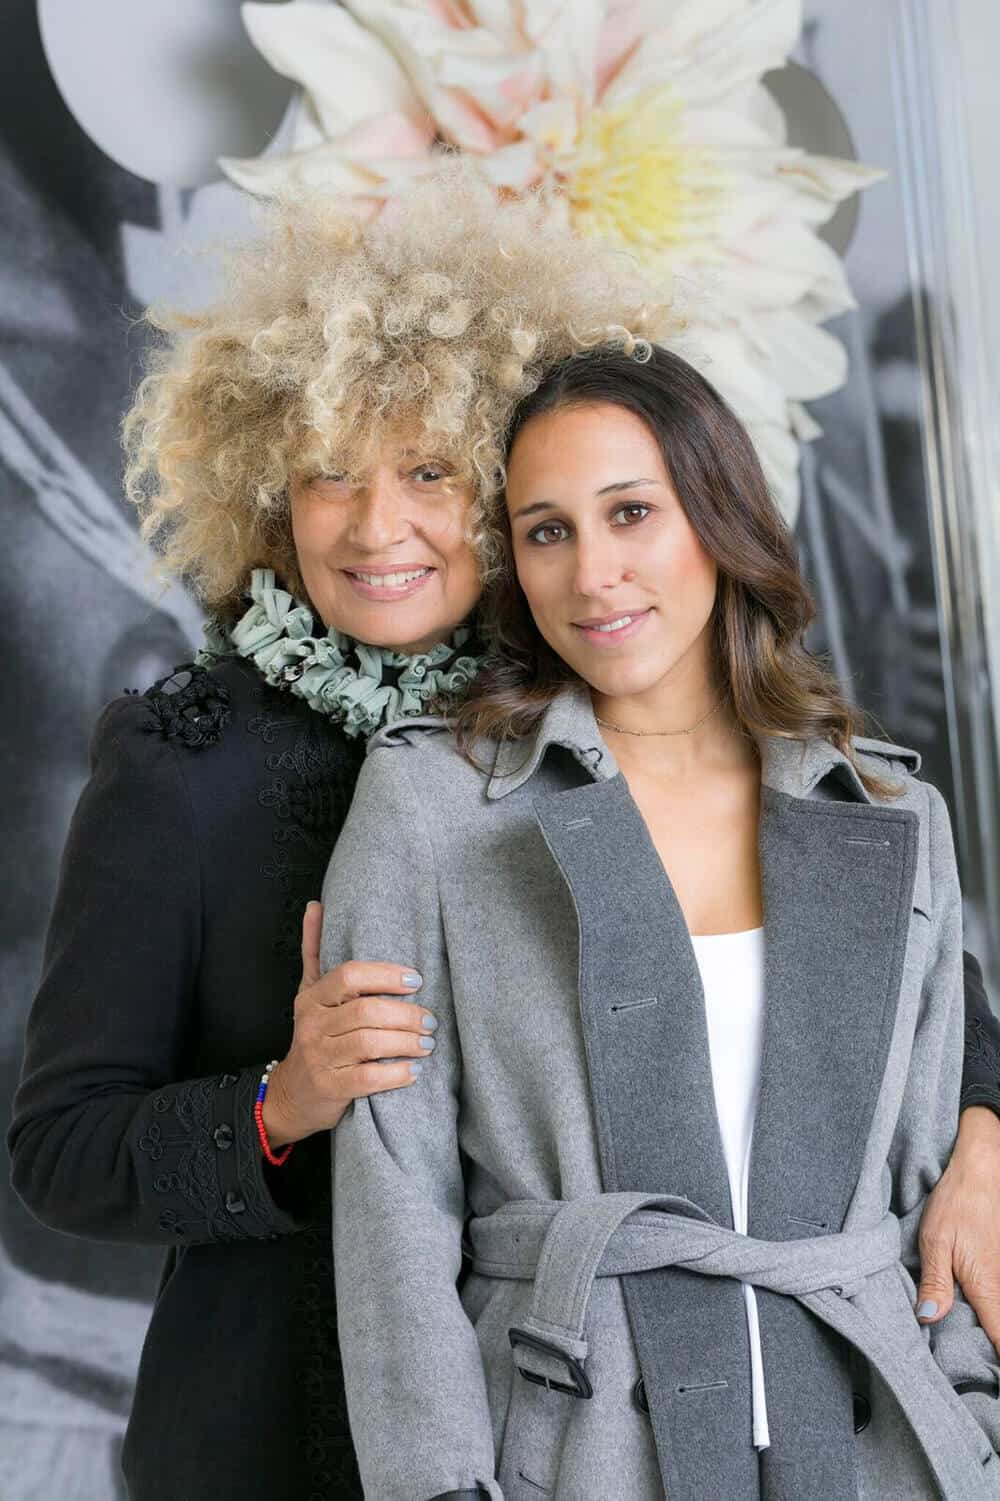 Owanto (left) and Katya Berger (right), 2018. The filiation between mother and daughter, artist and producer. Courtesy of the artist.